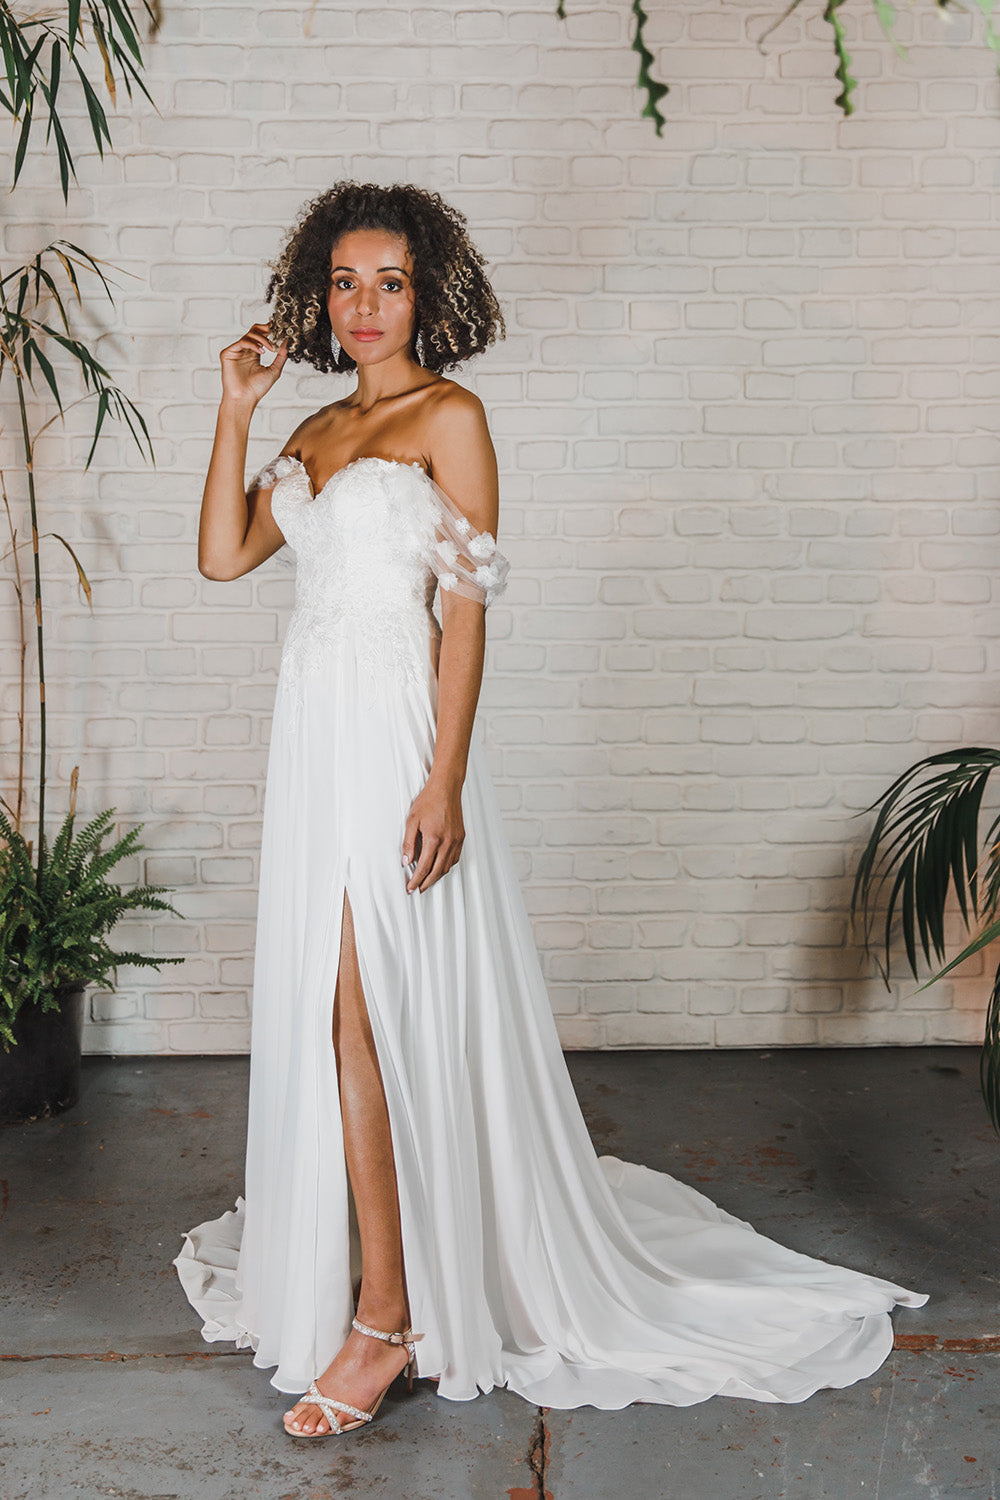 Bridal fashion news: Grace Loves Lace has unveiled its first e...